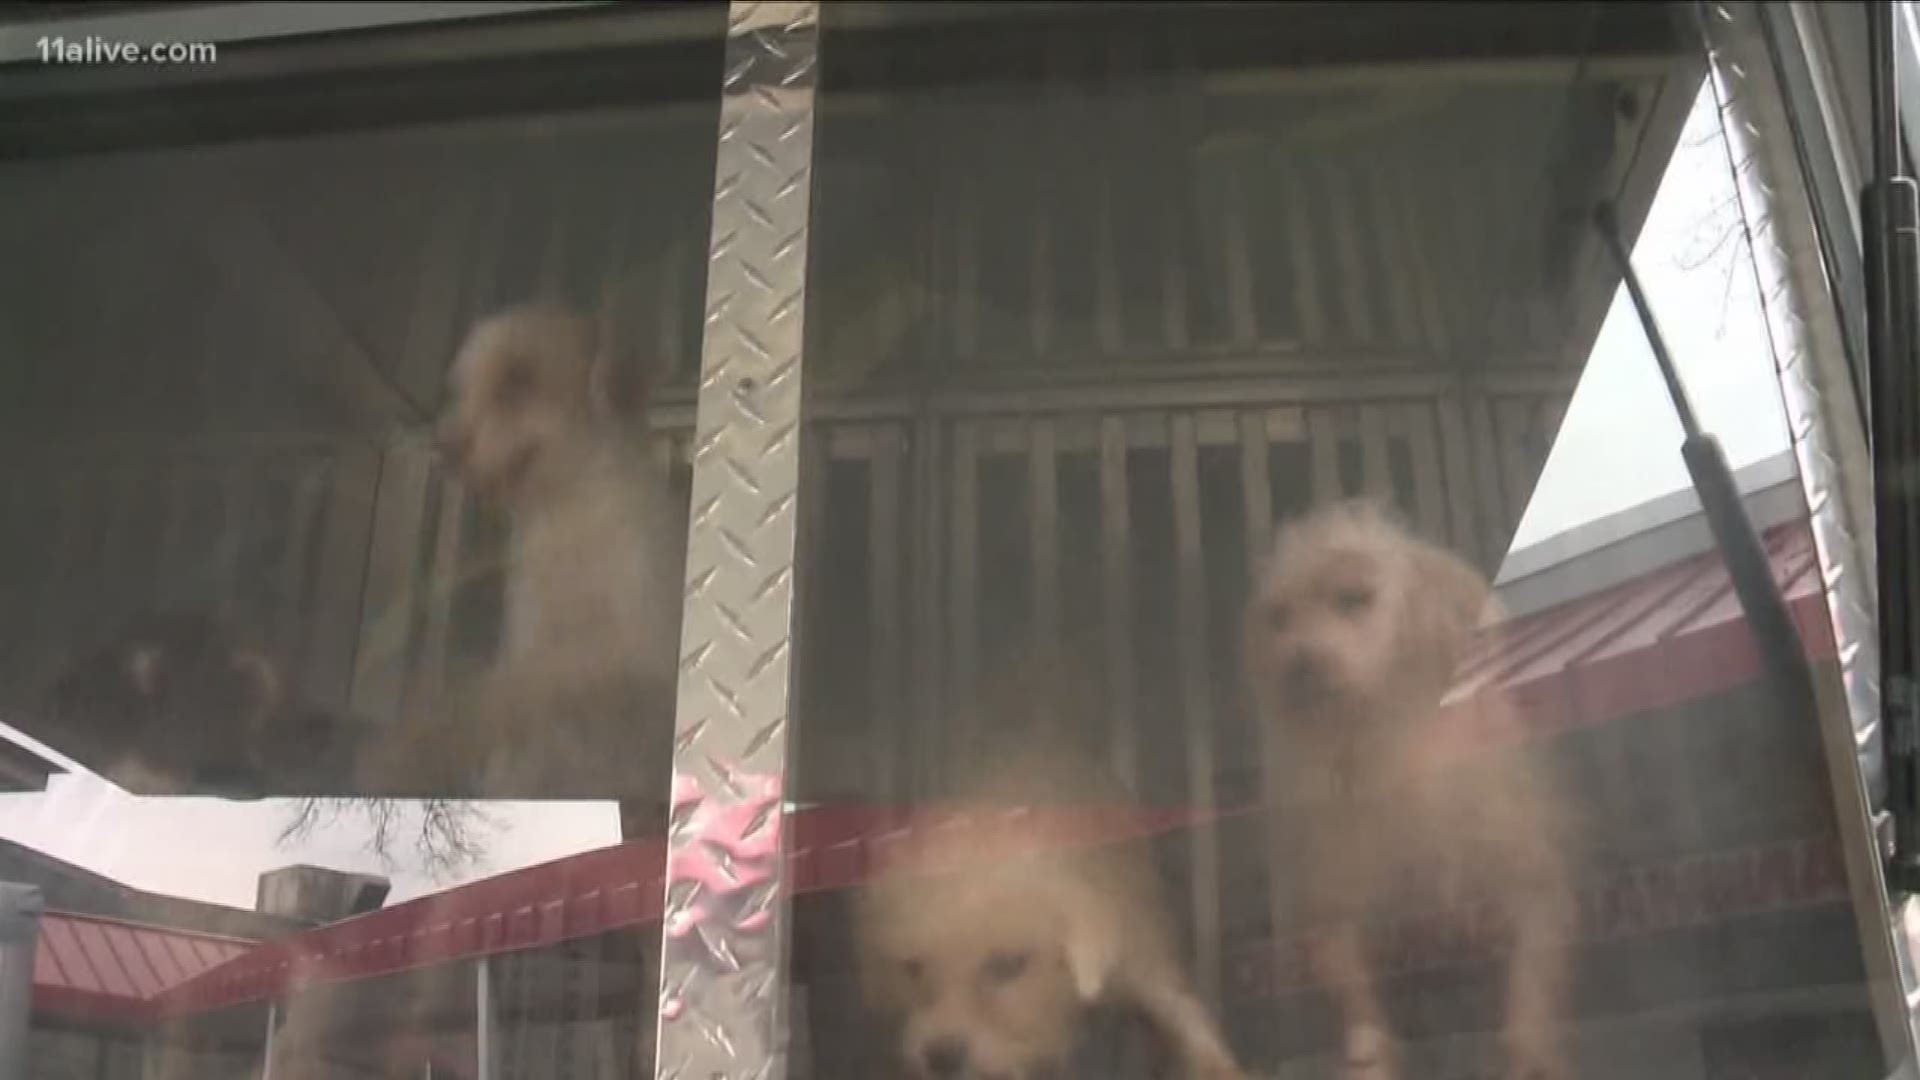 Hundreds of dogs have been rescued from puppy mills across Georgia. While they are forever changed, breeders often avoid significant jail time.